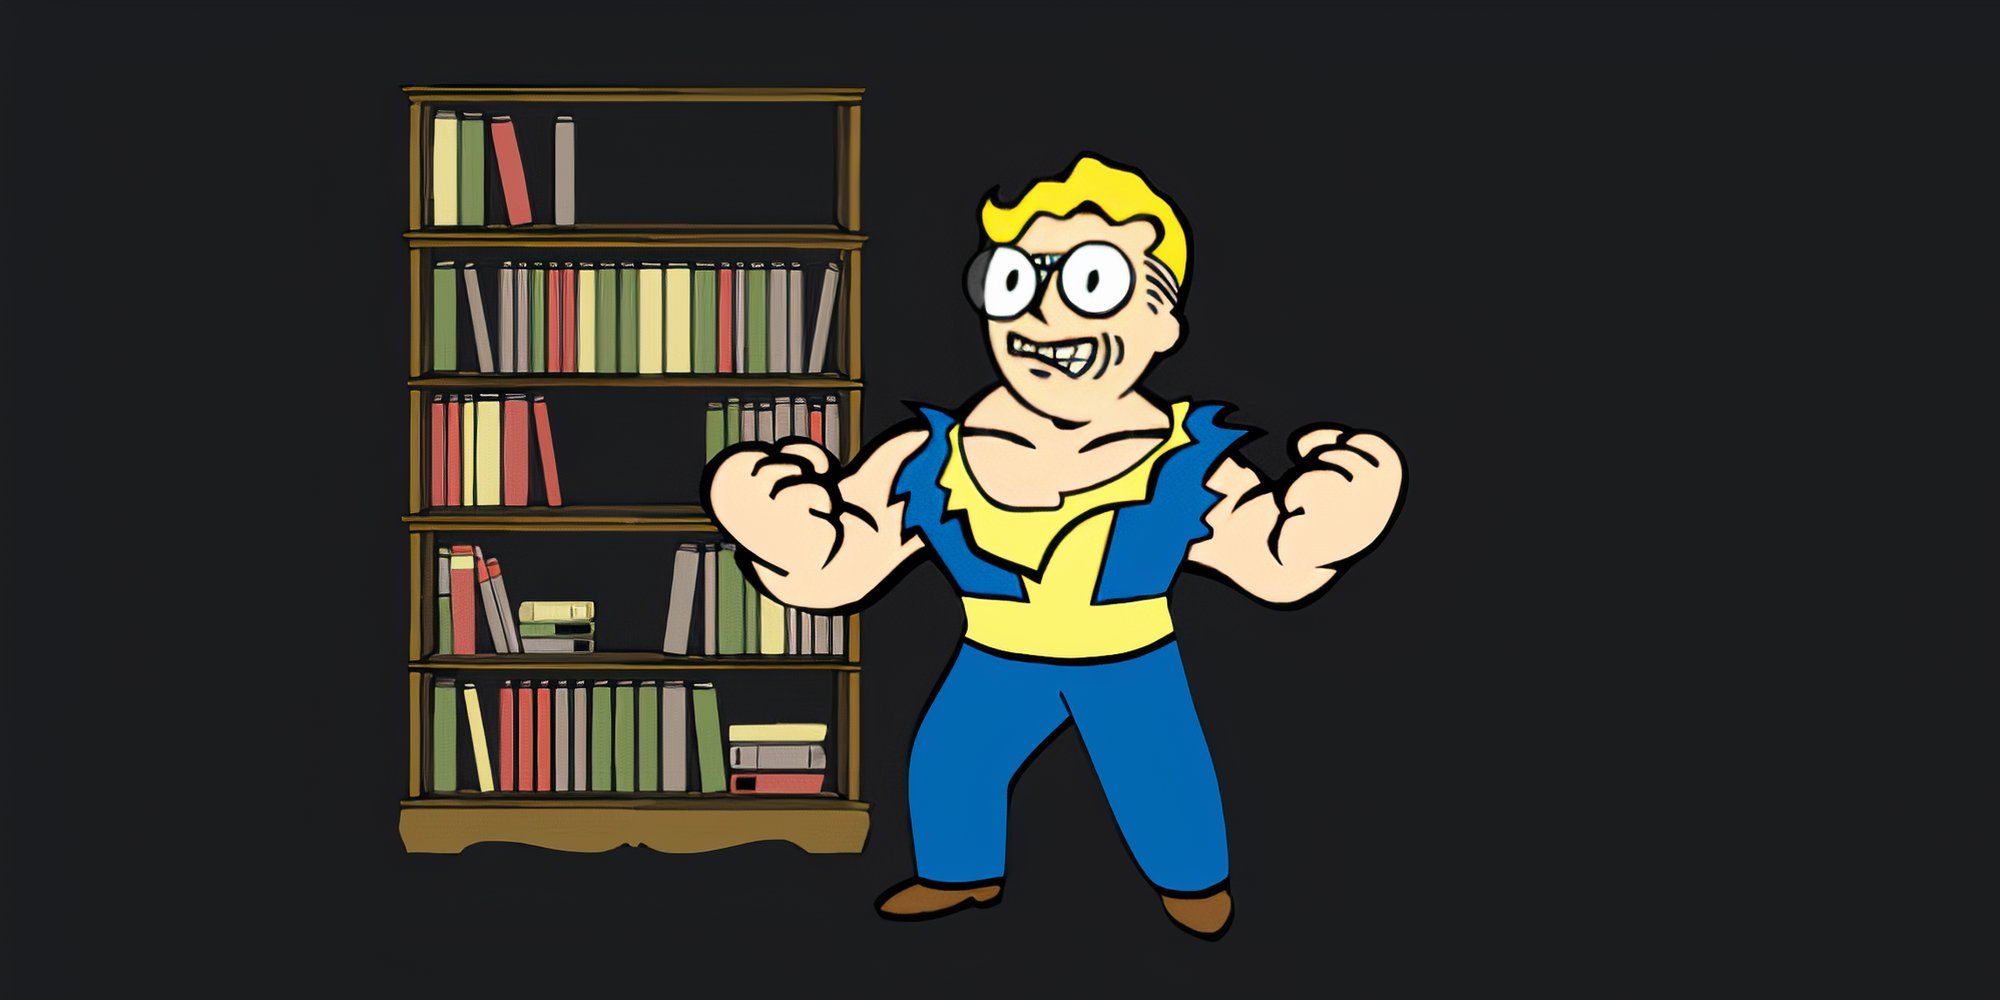 Vault Boy bulks up and rips through his jumpsuit